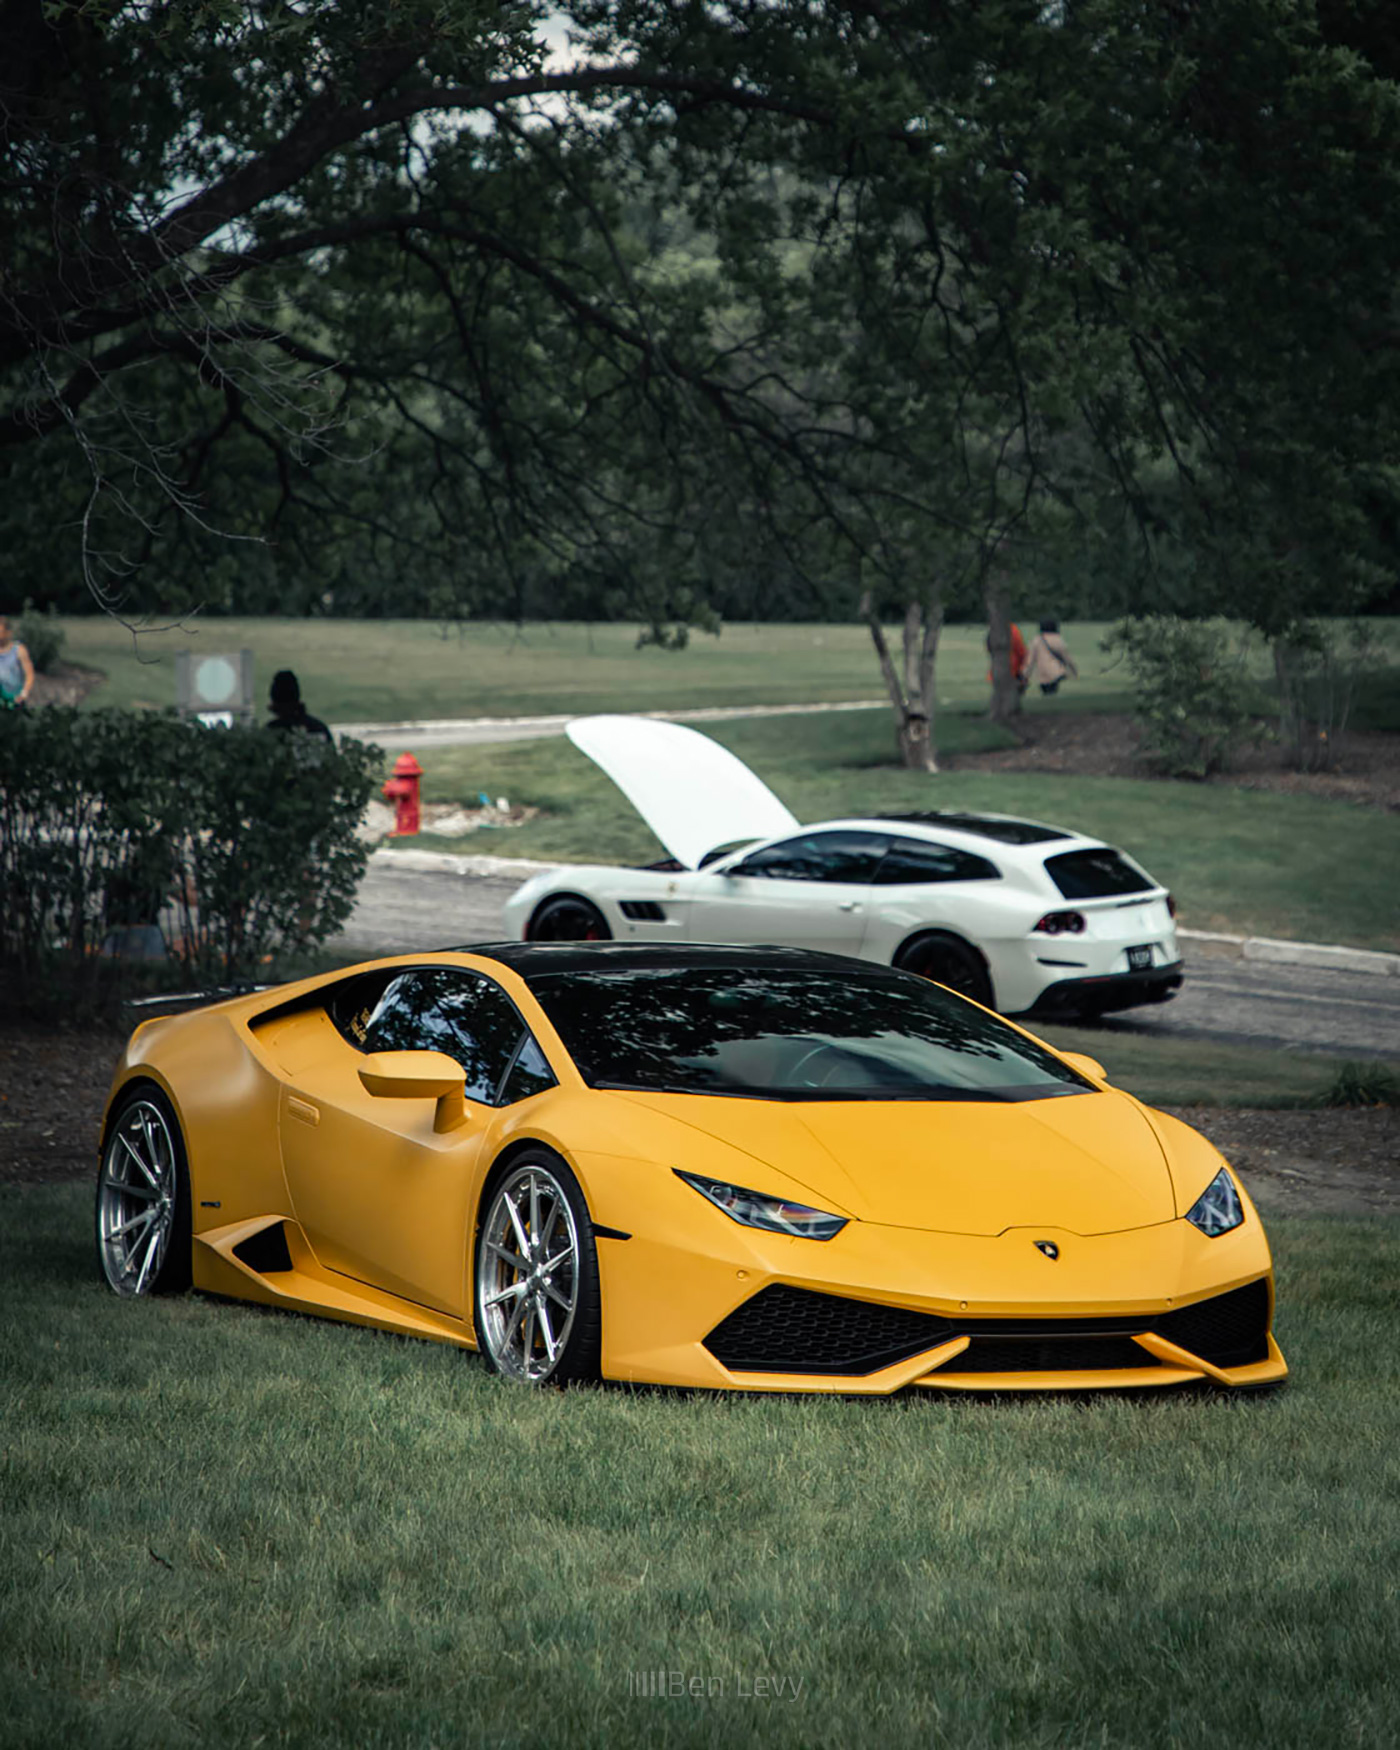 The Chicagocarguy Lamborghini Aventador Parked in the Grass